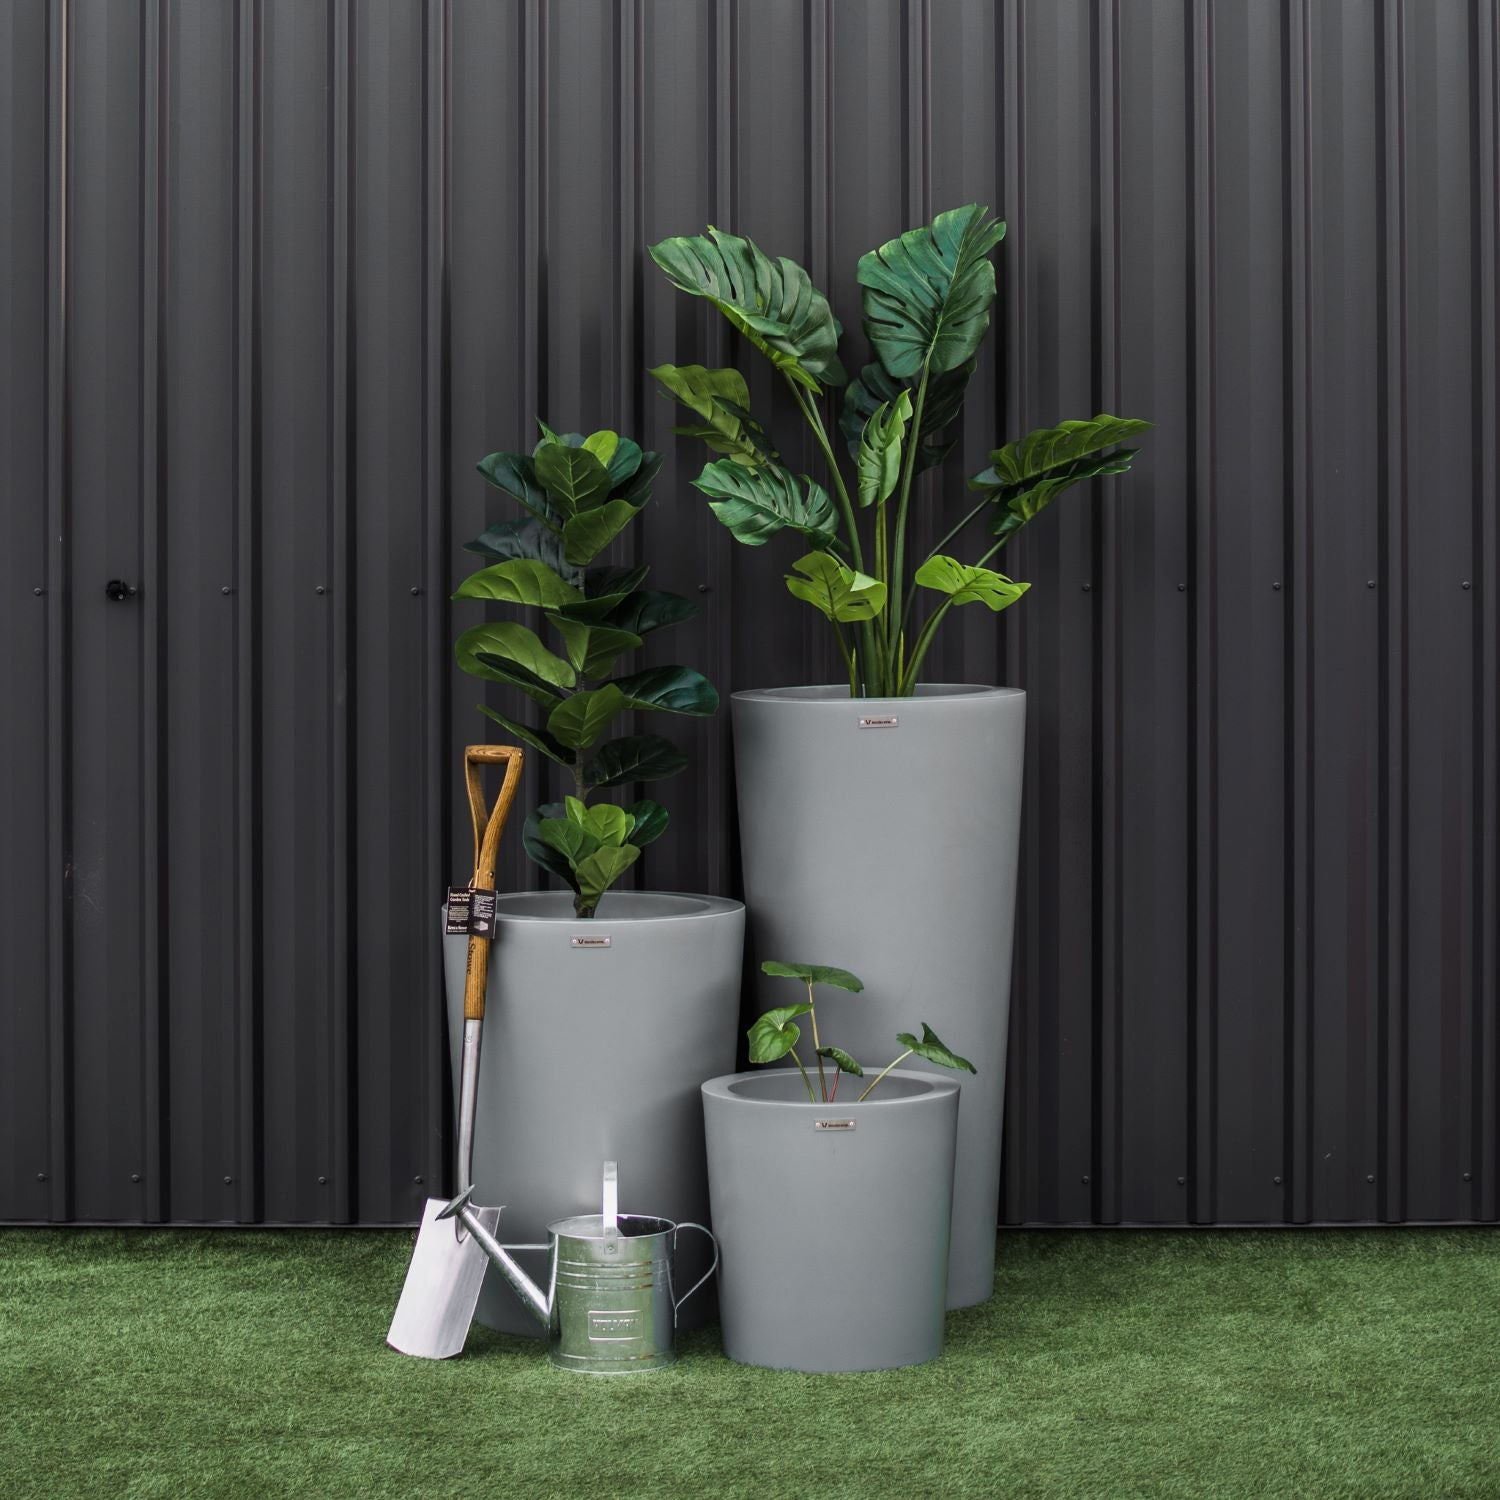 A cluster of grey Modscene planter pots. The pots have greenery in them and are in front of a black wall.